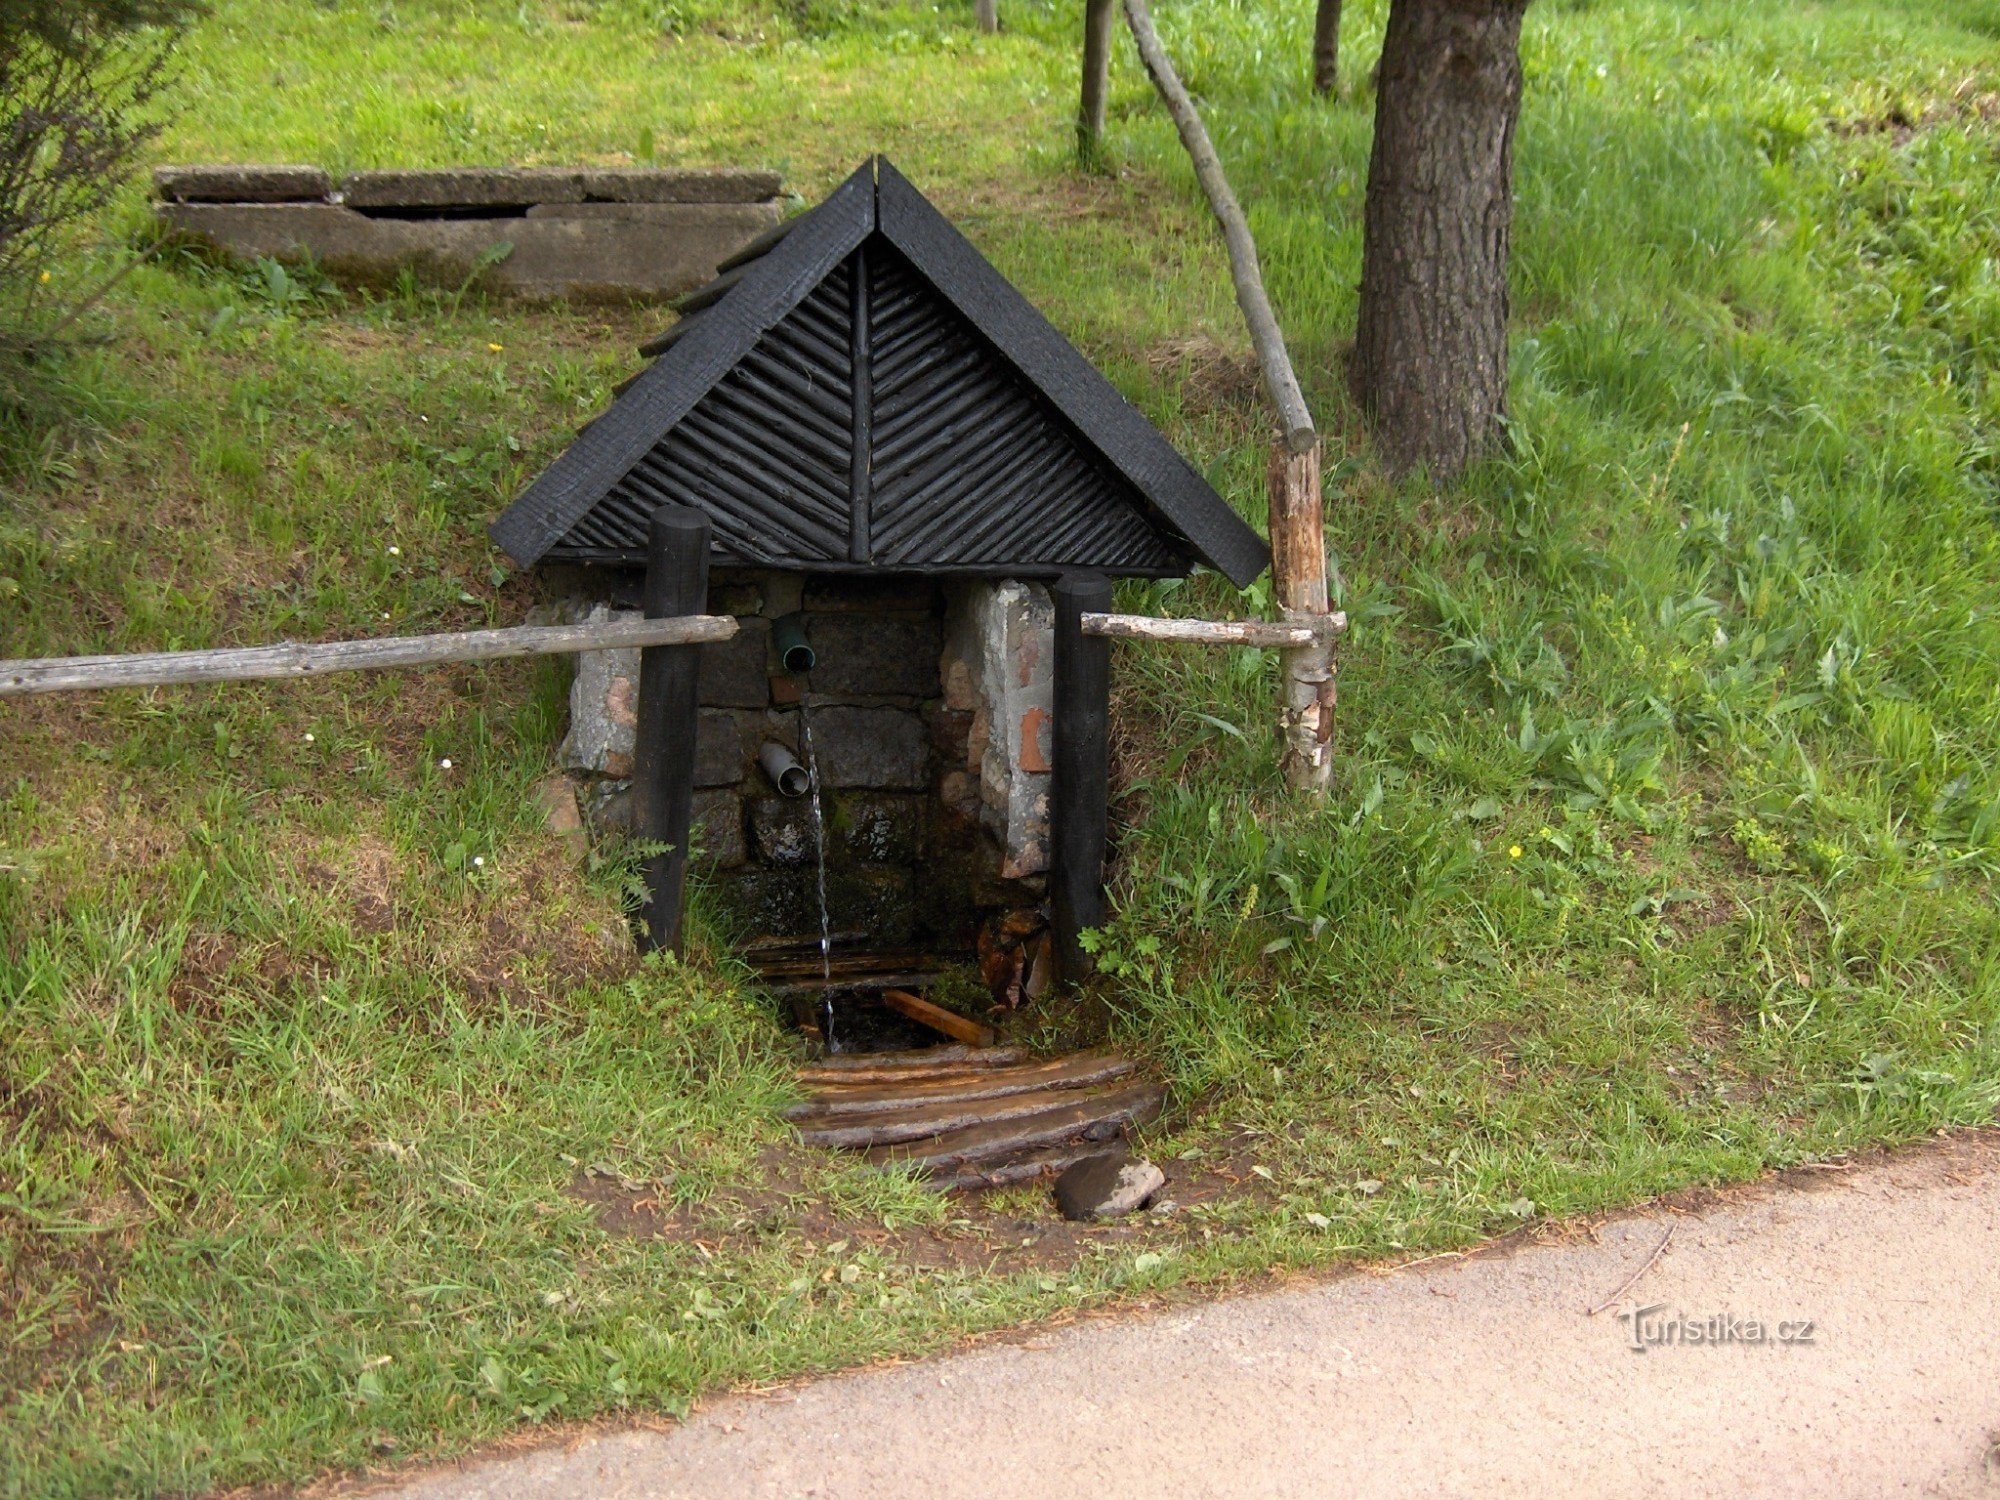 A well in Moldova